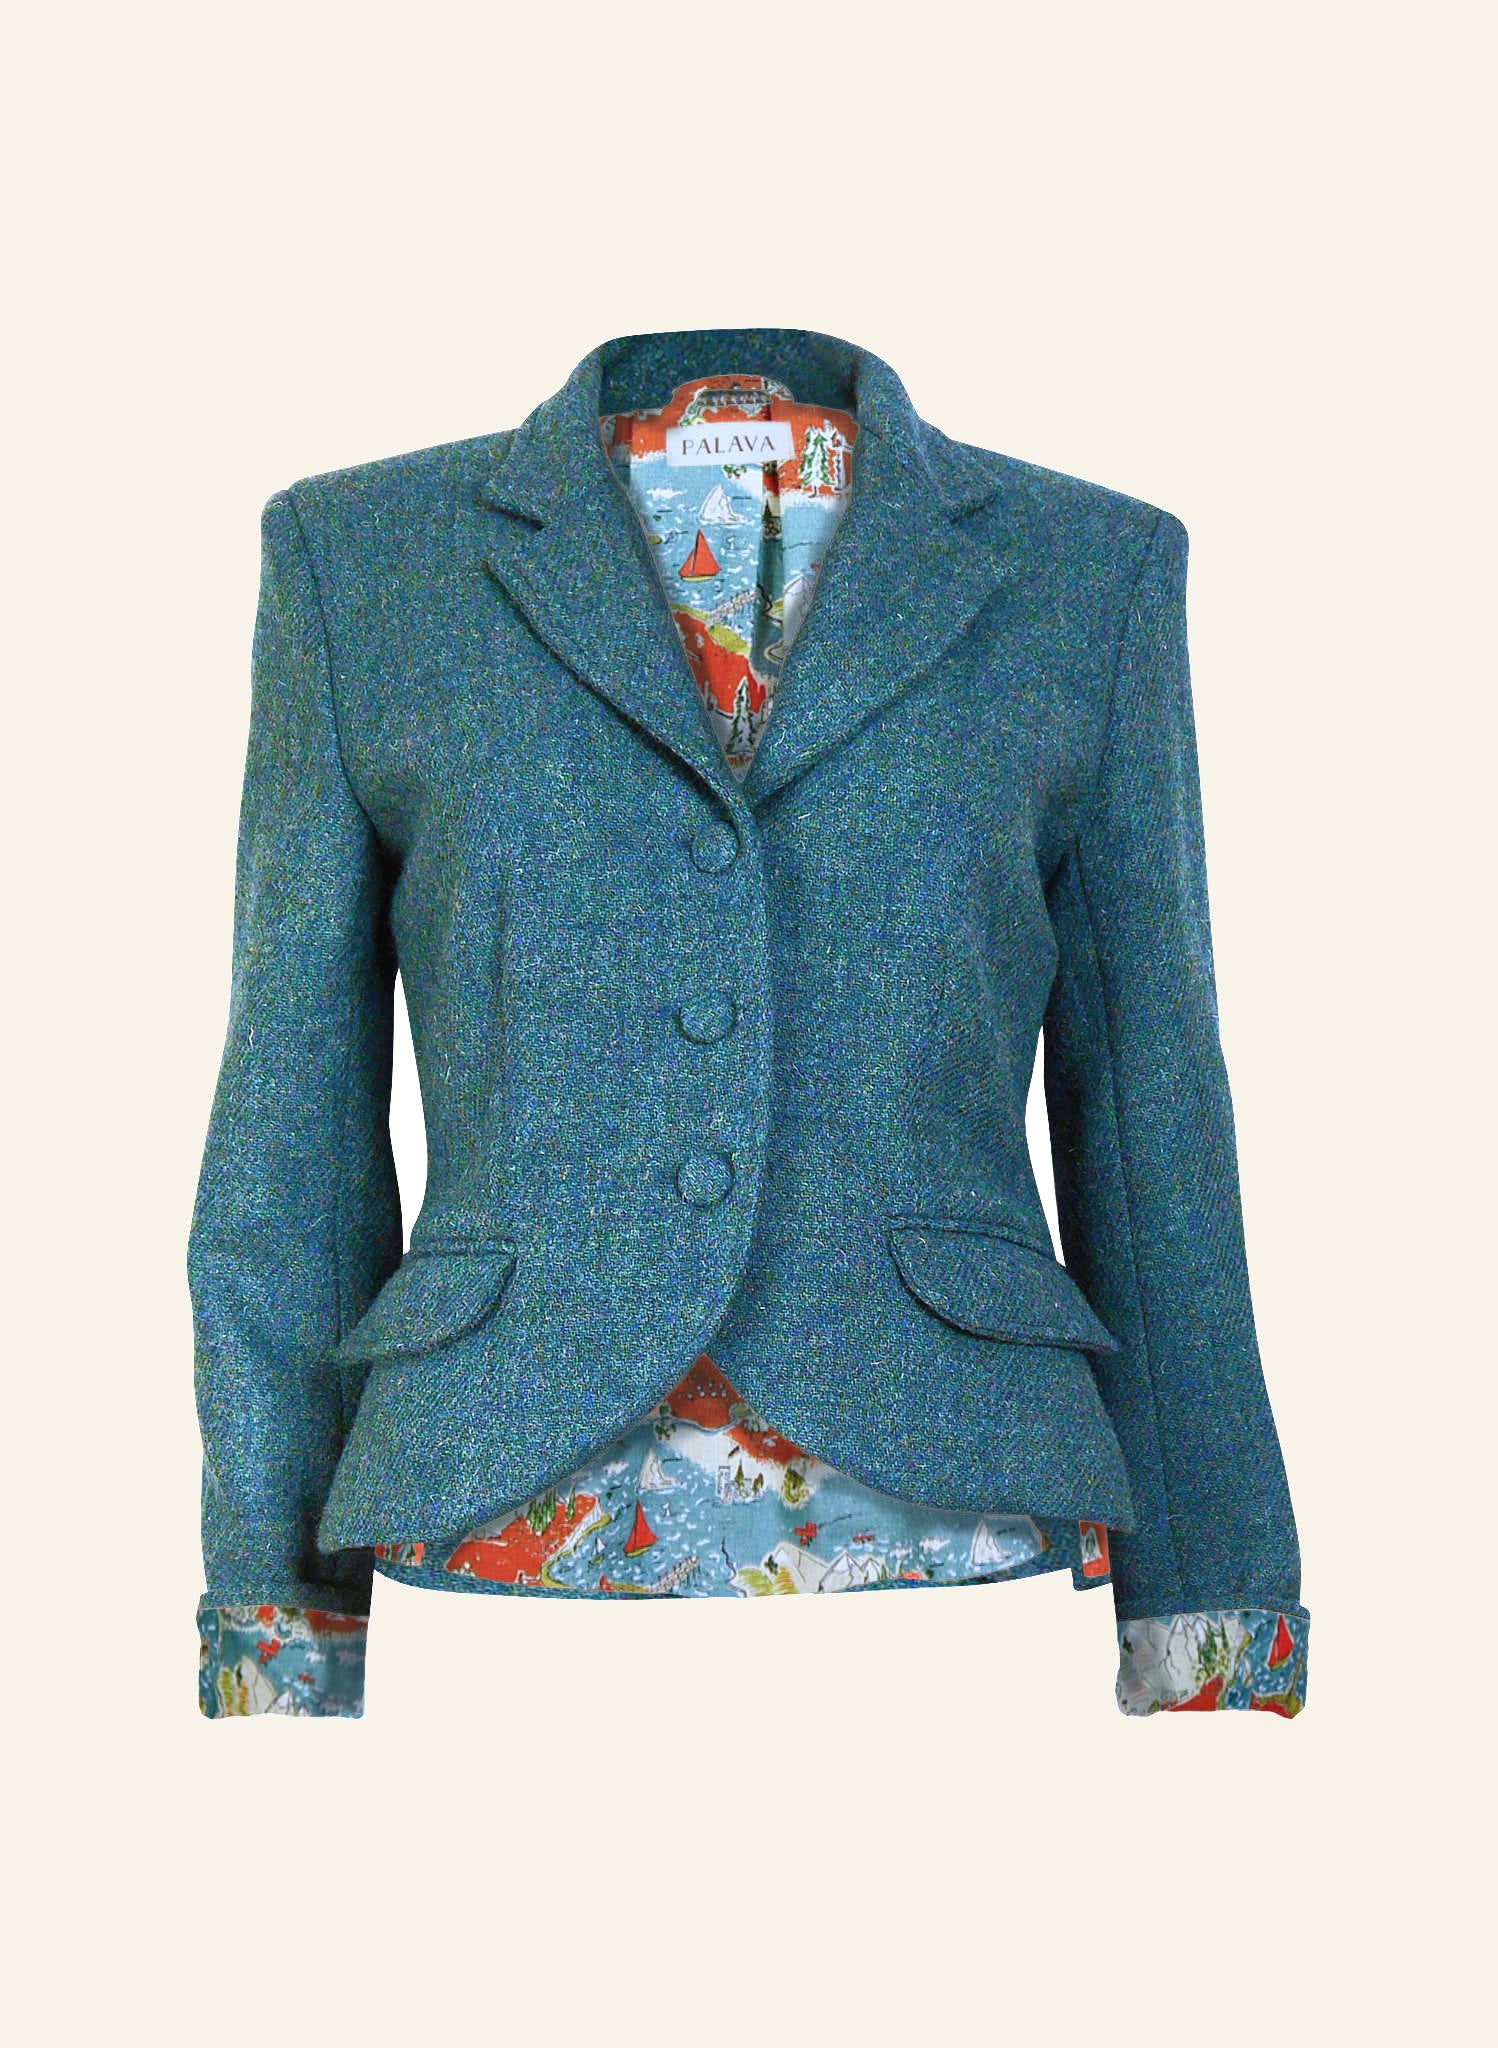 Heritage Riding Jacket - Teal with Treasure Map Lining